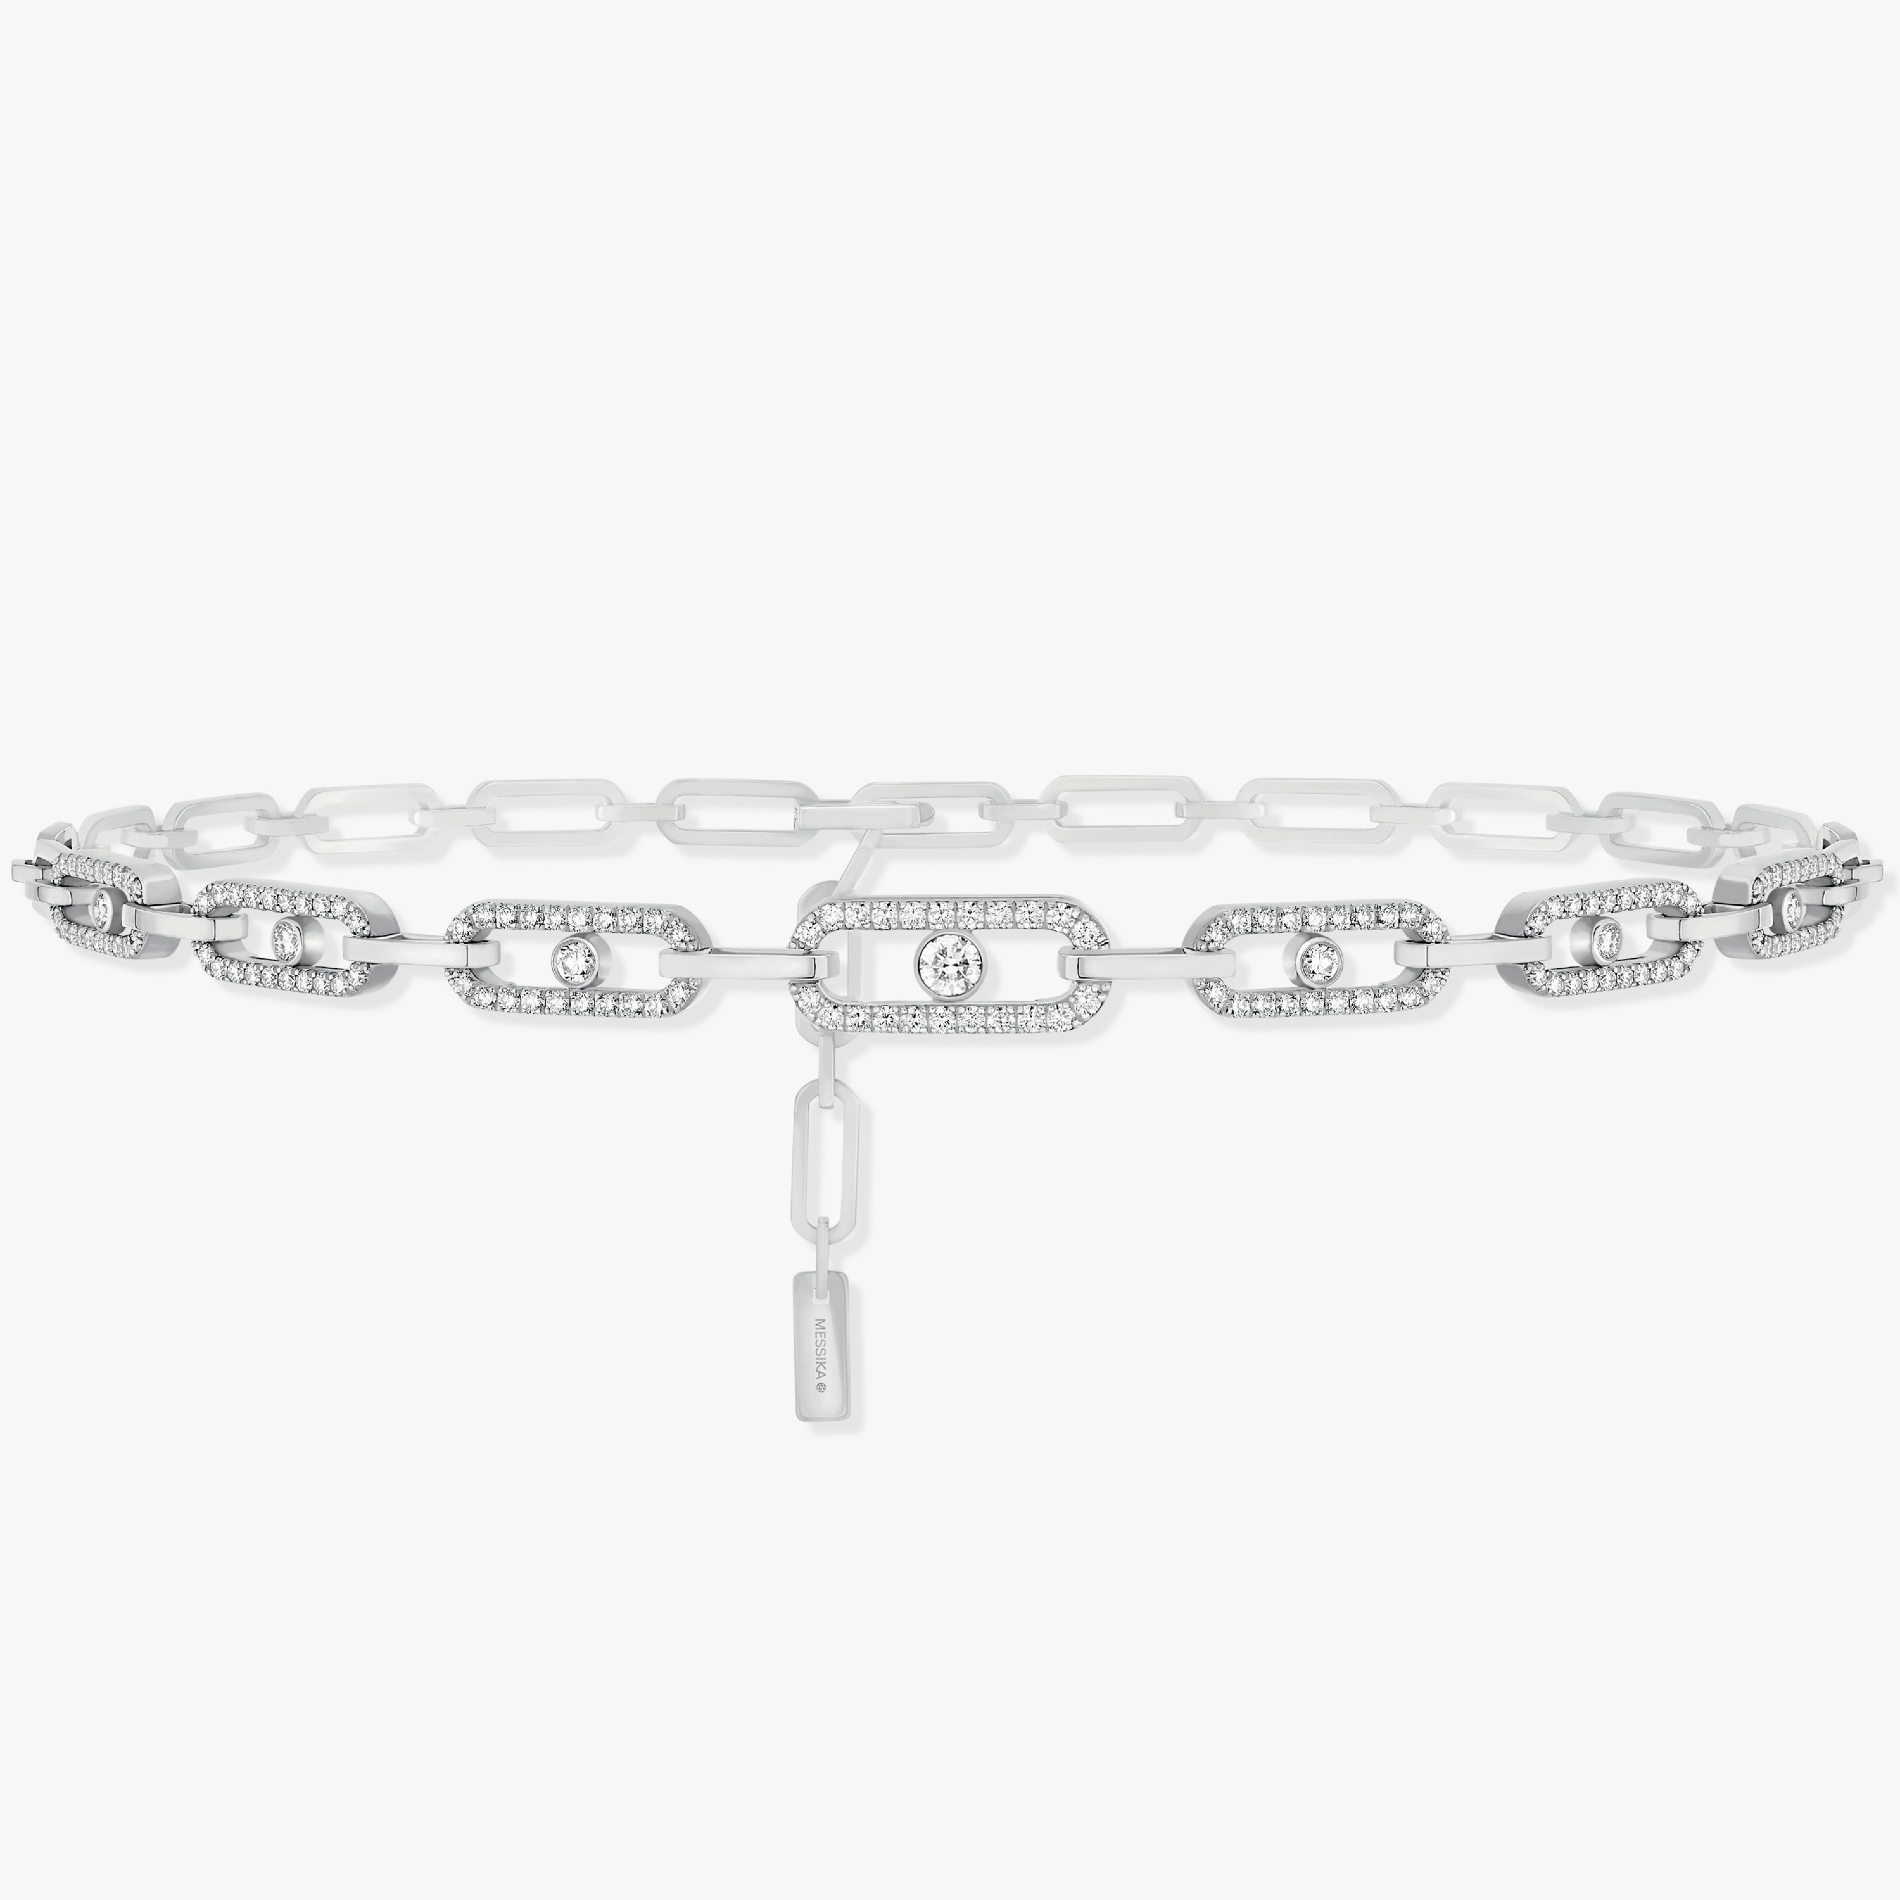 Move Link Diamond Choker Necklace in White Gold